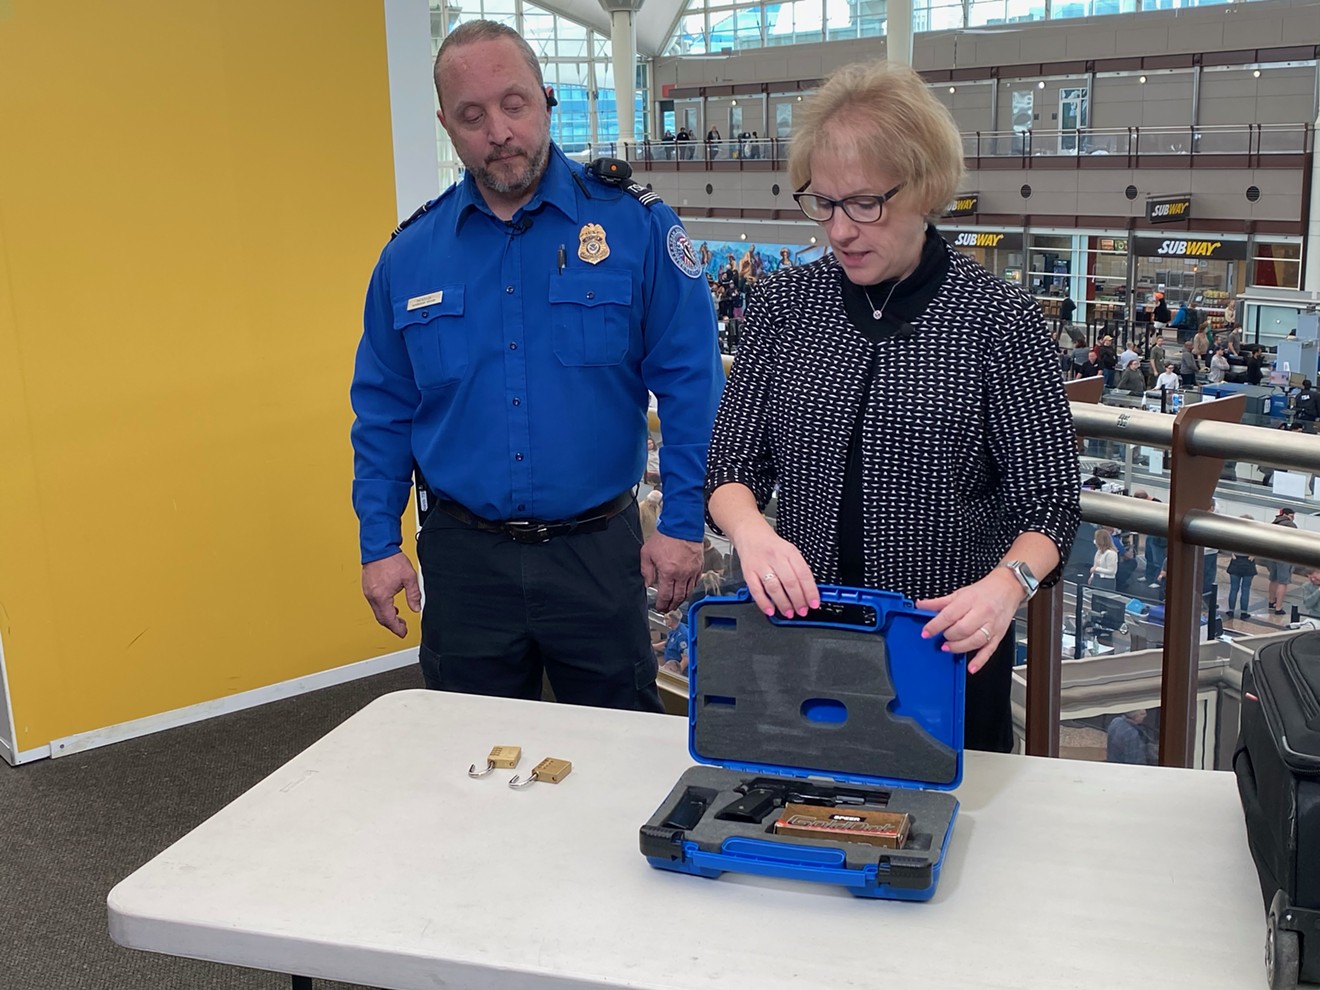 Supervisory TSA Officer Richard Mendoza and spokesperson Lorie Dankers show the proper way to store firearms while traveling.